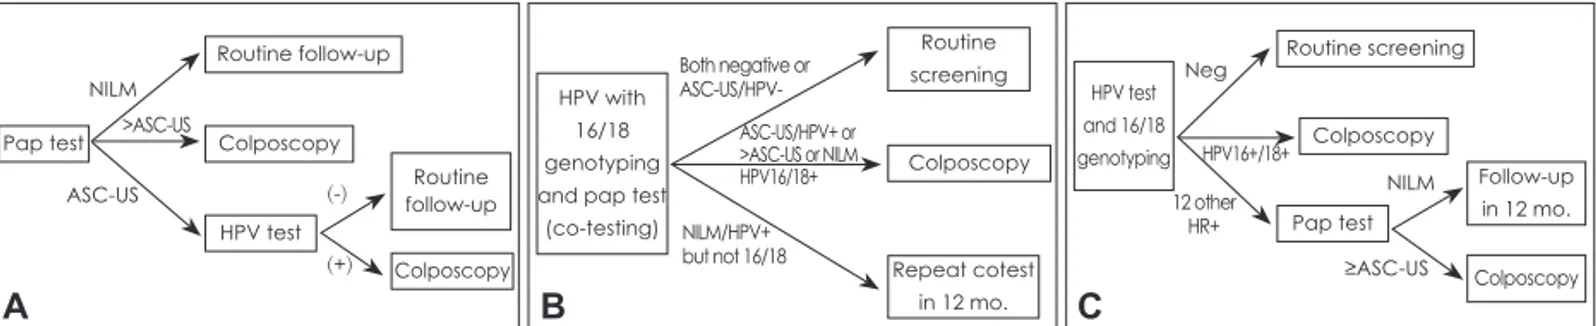 Fig. 1. Cervical screening strategies in non-hysterectomized women aged ≥30 years: primary screening algorithms